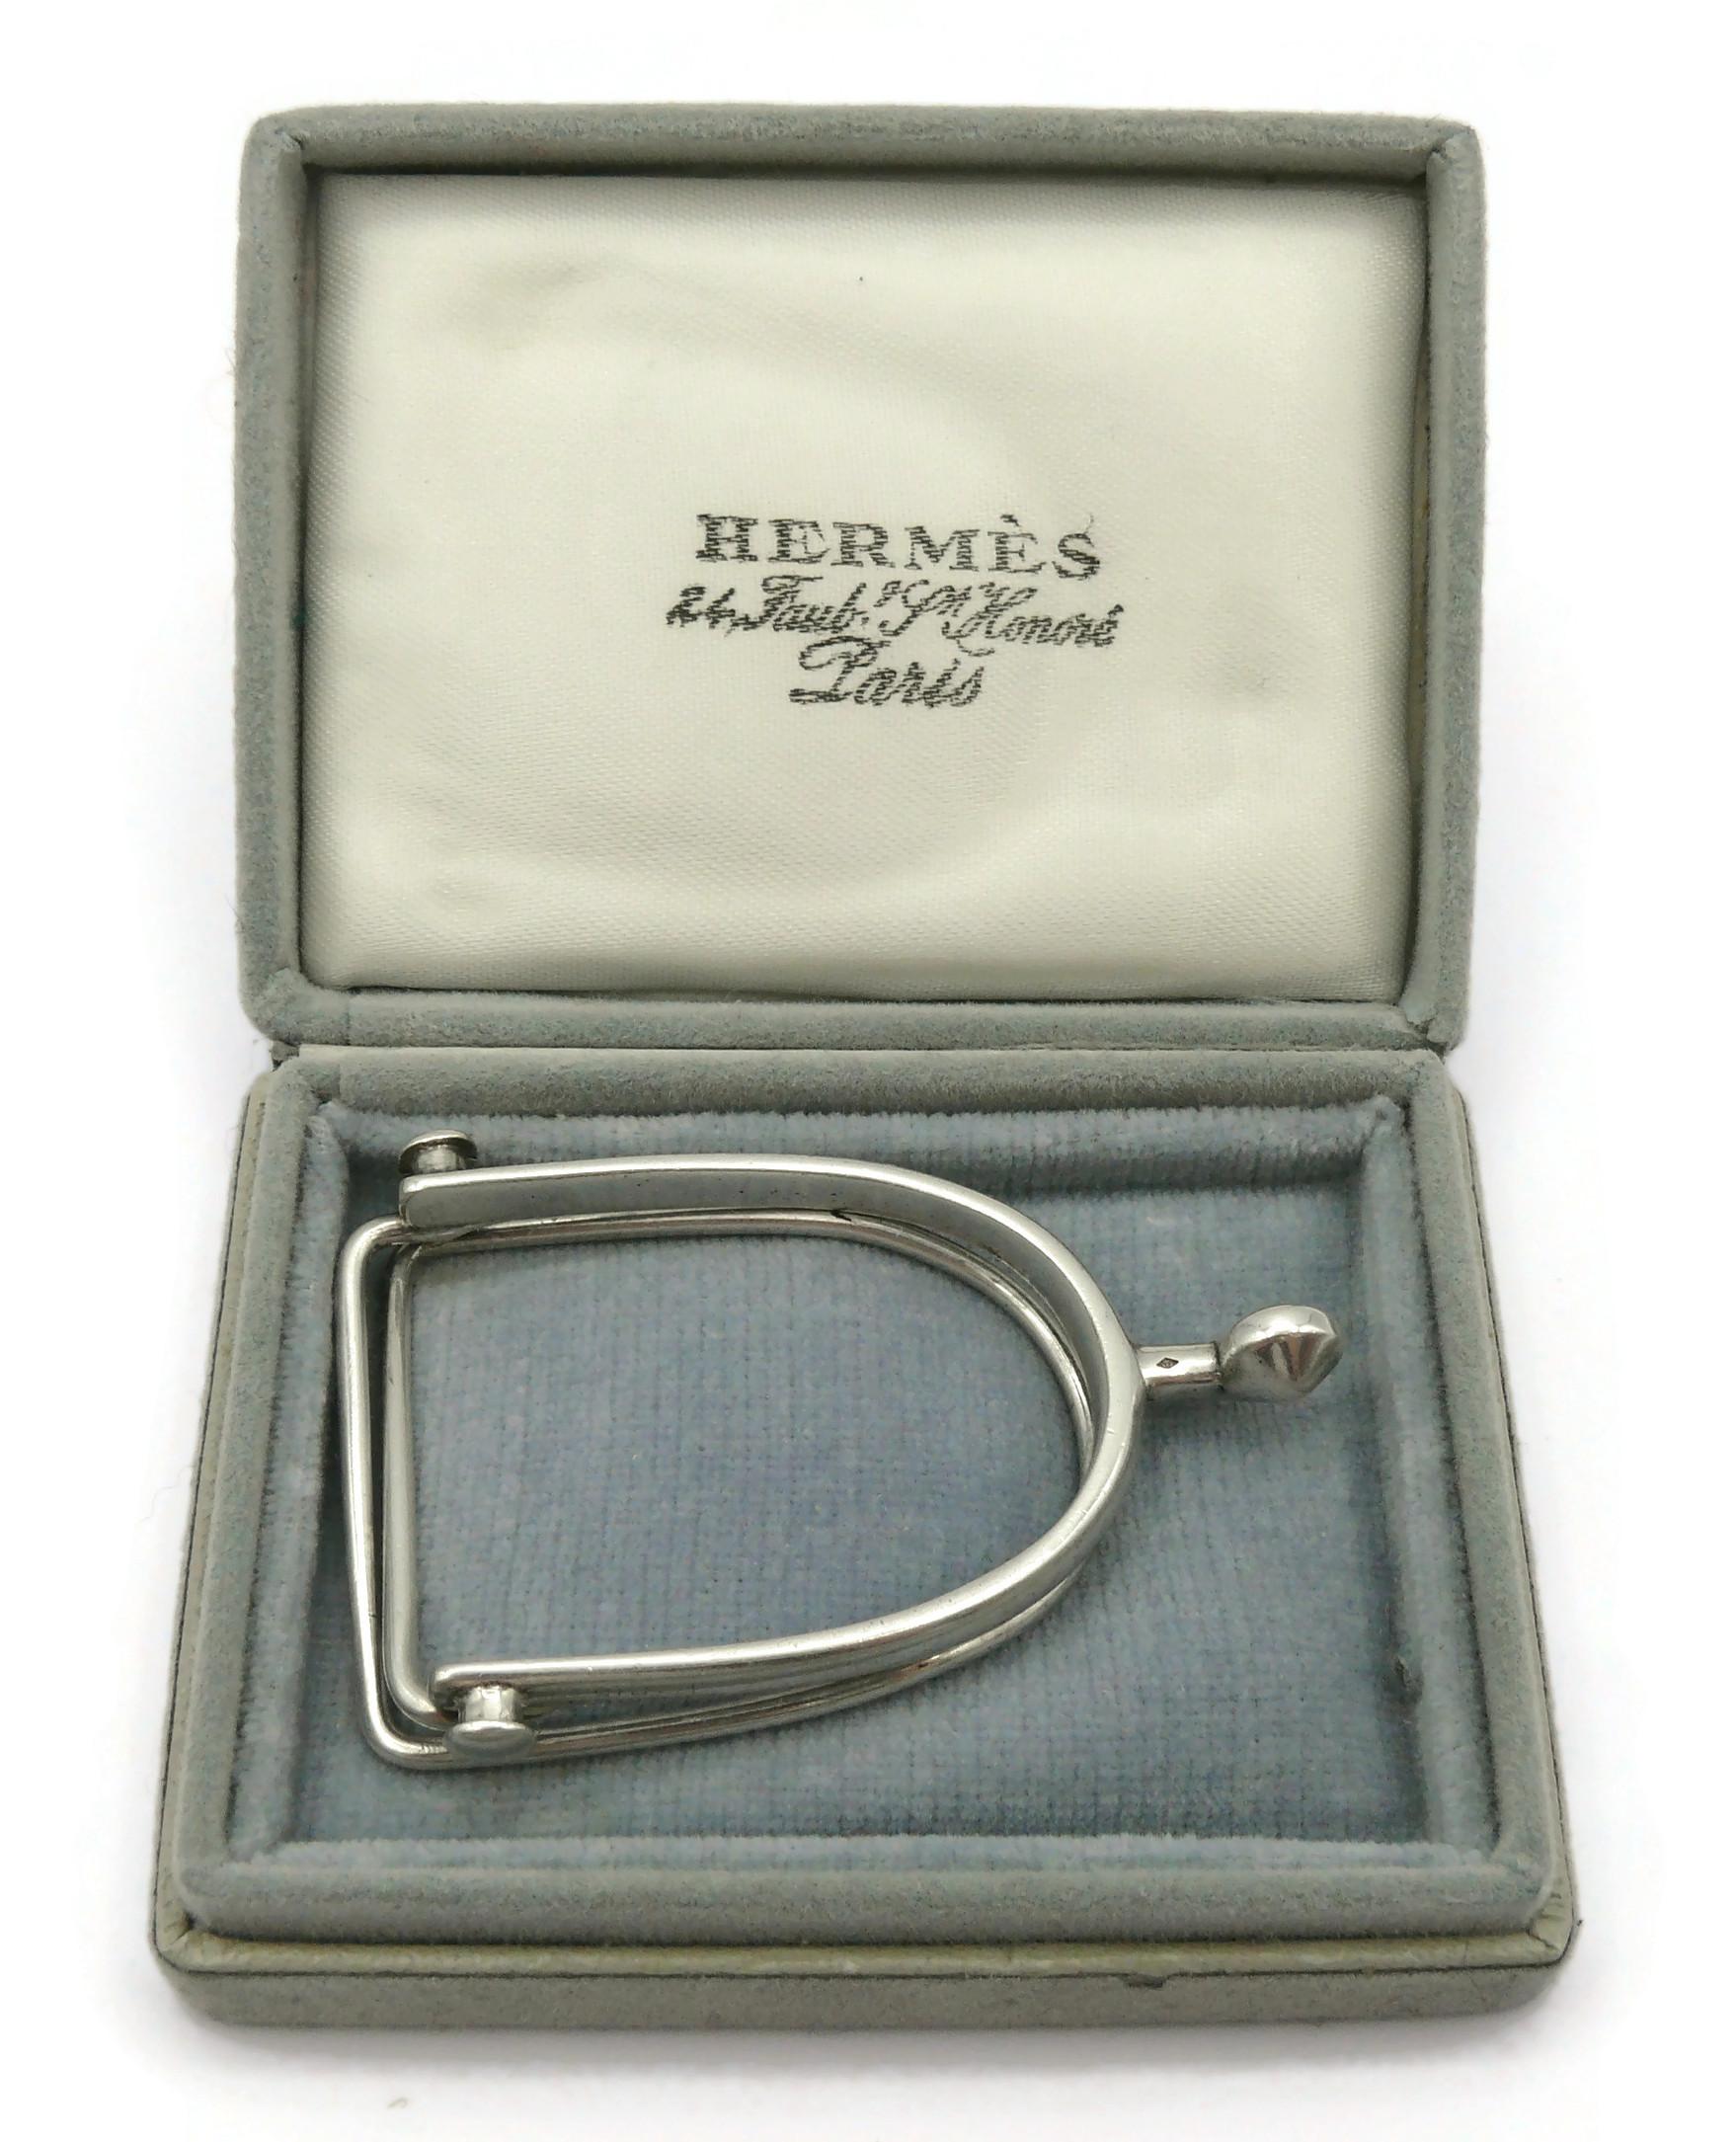 HERMES vintage silver money clip featuring a stirrup.

Embossed HERMES.
French silver 